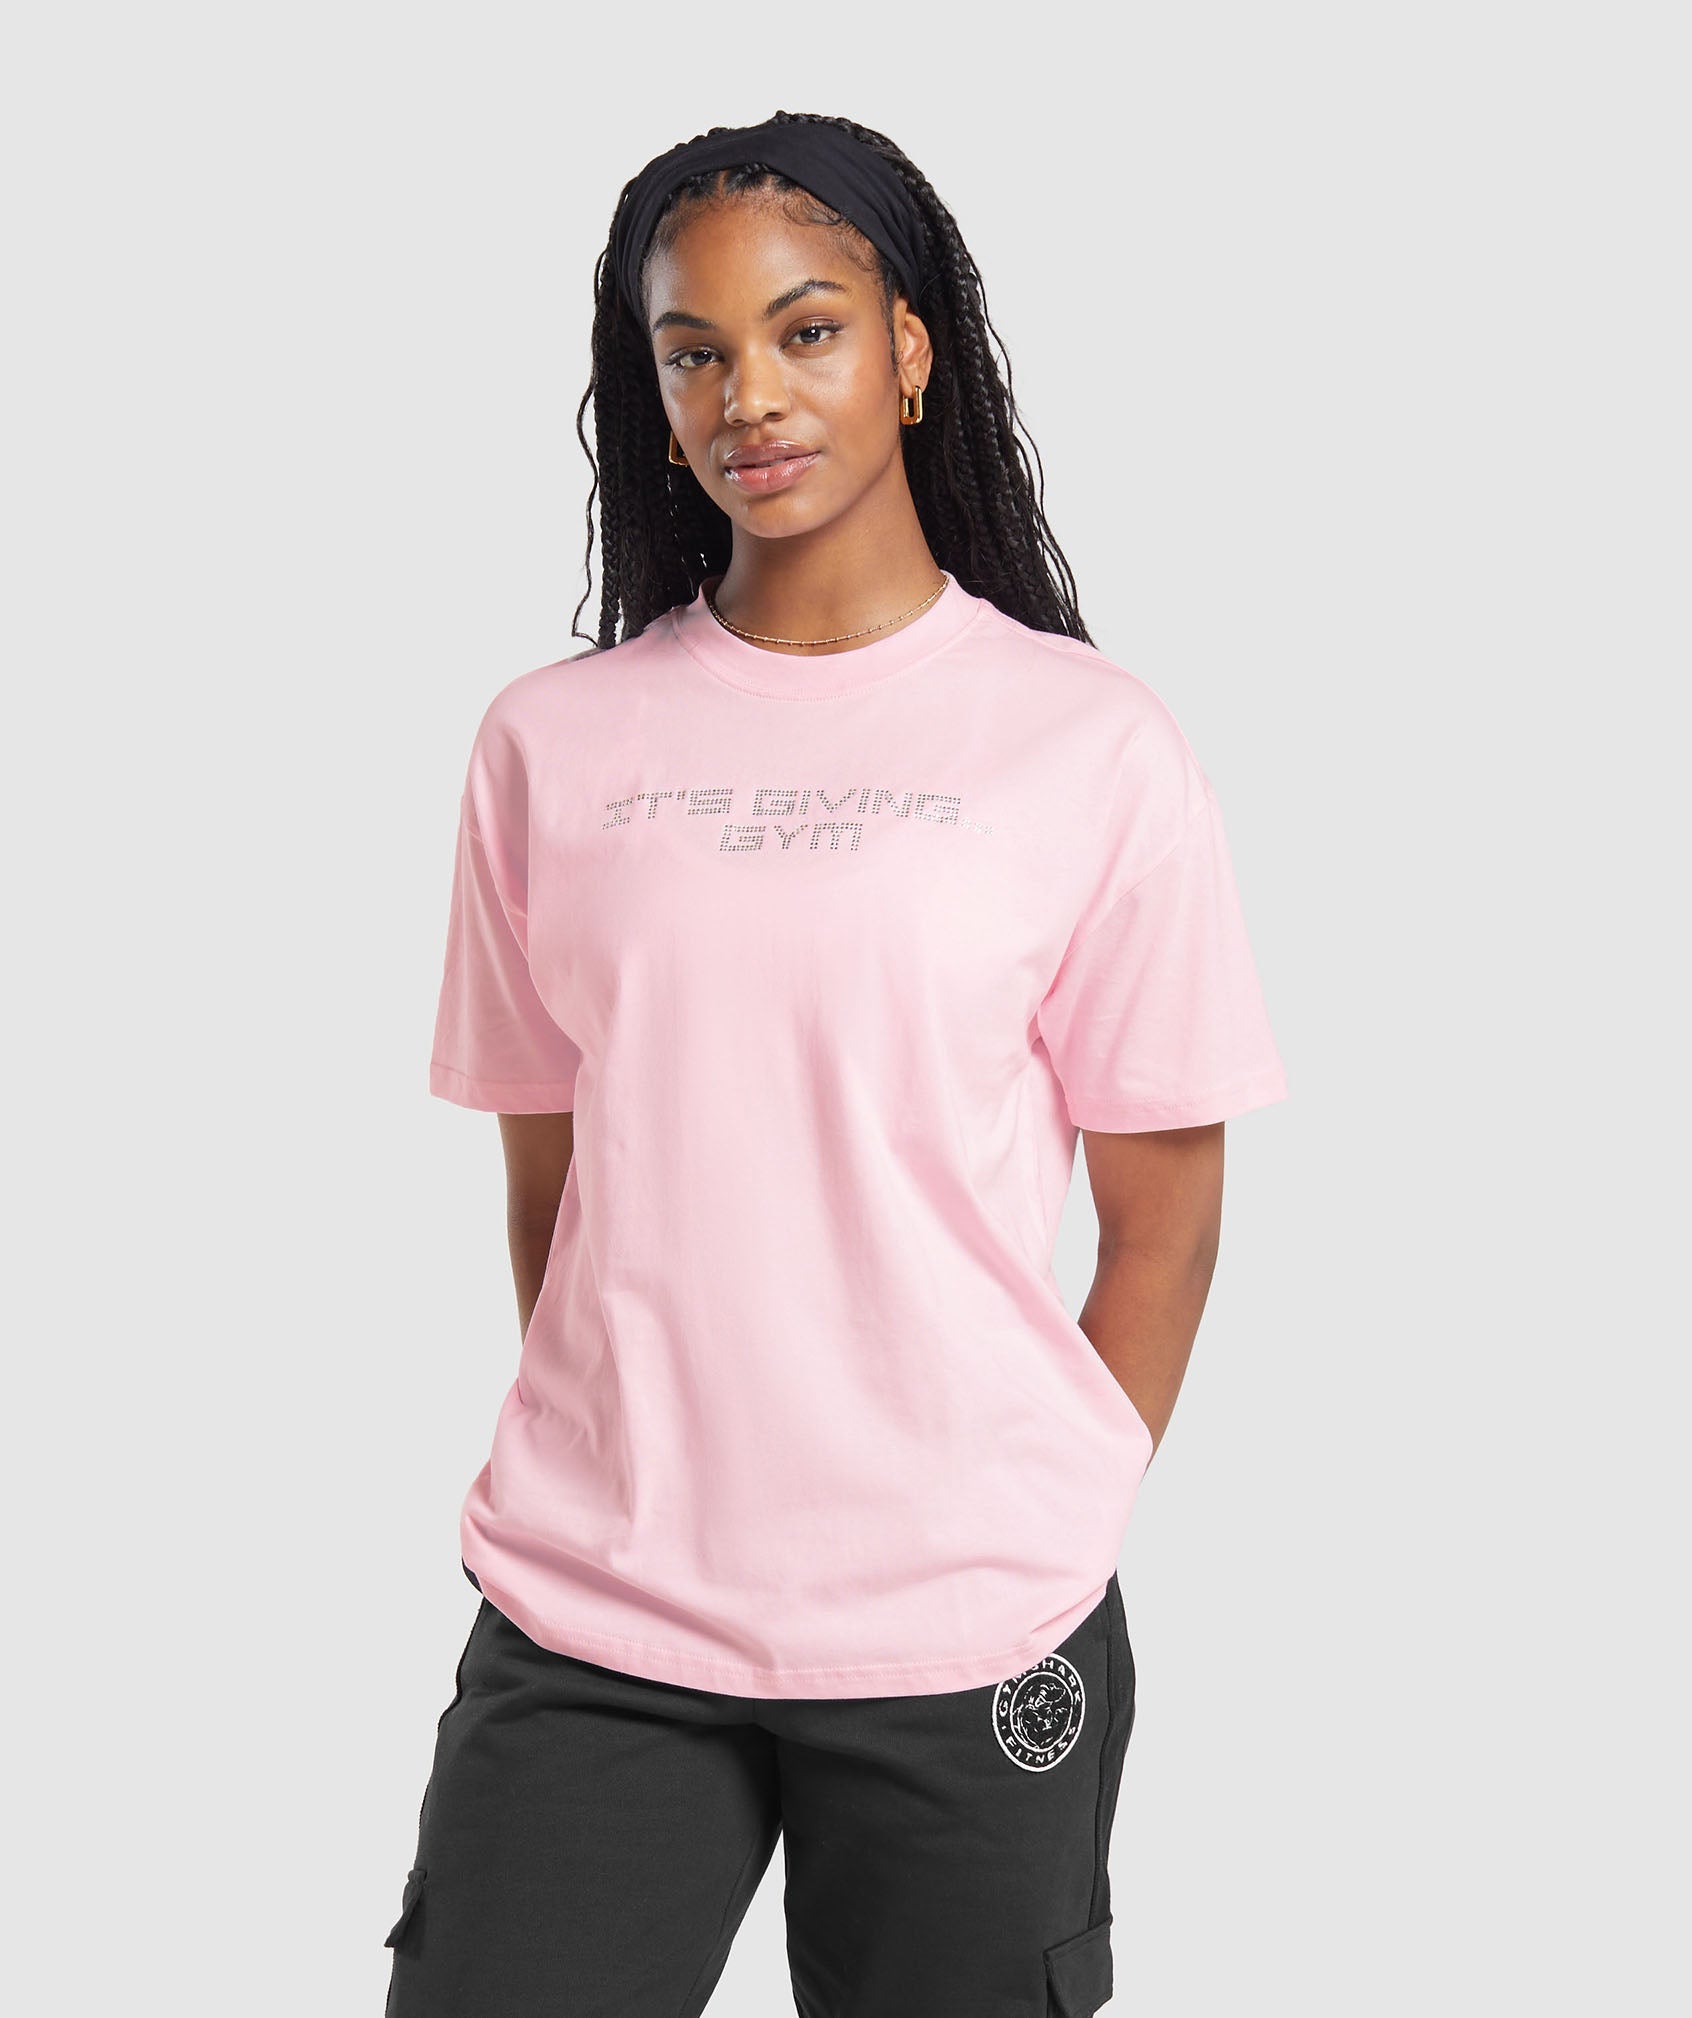 Its Giving Gym Oversized T-Shirt in Dolly Pink - view 1